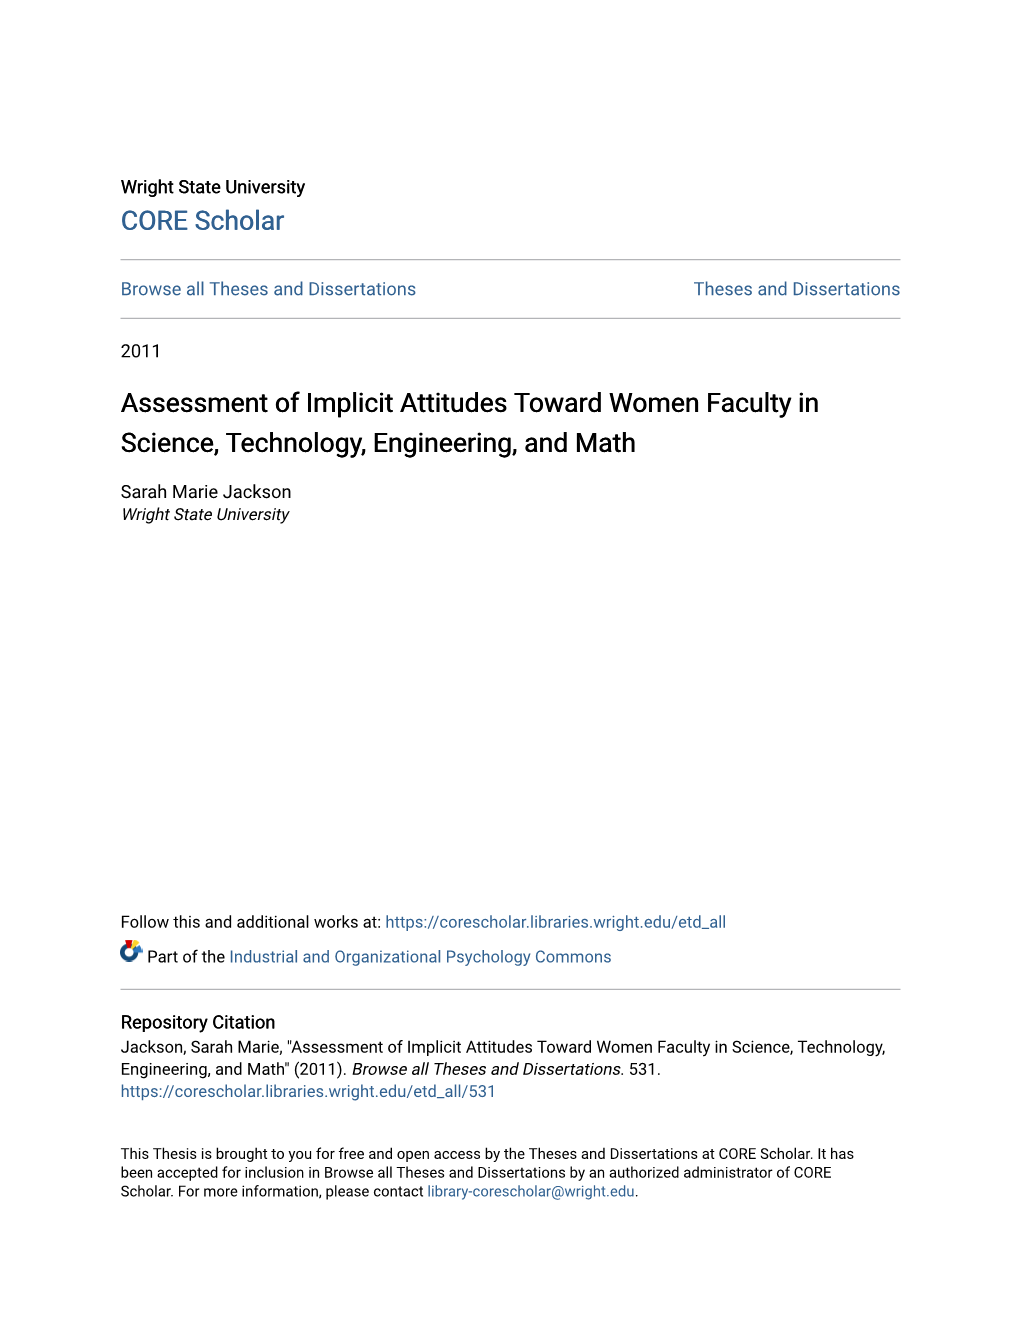 Assessment of Implicit Attitudes Toward Women Faculty in Science, Technology, Engineering, and Math